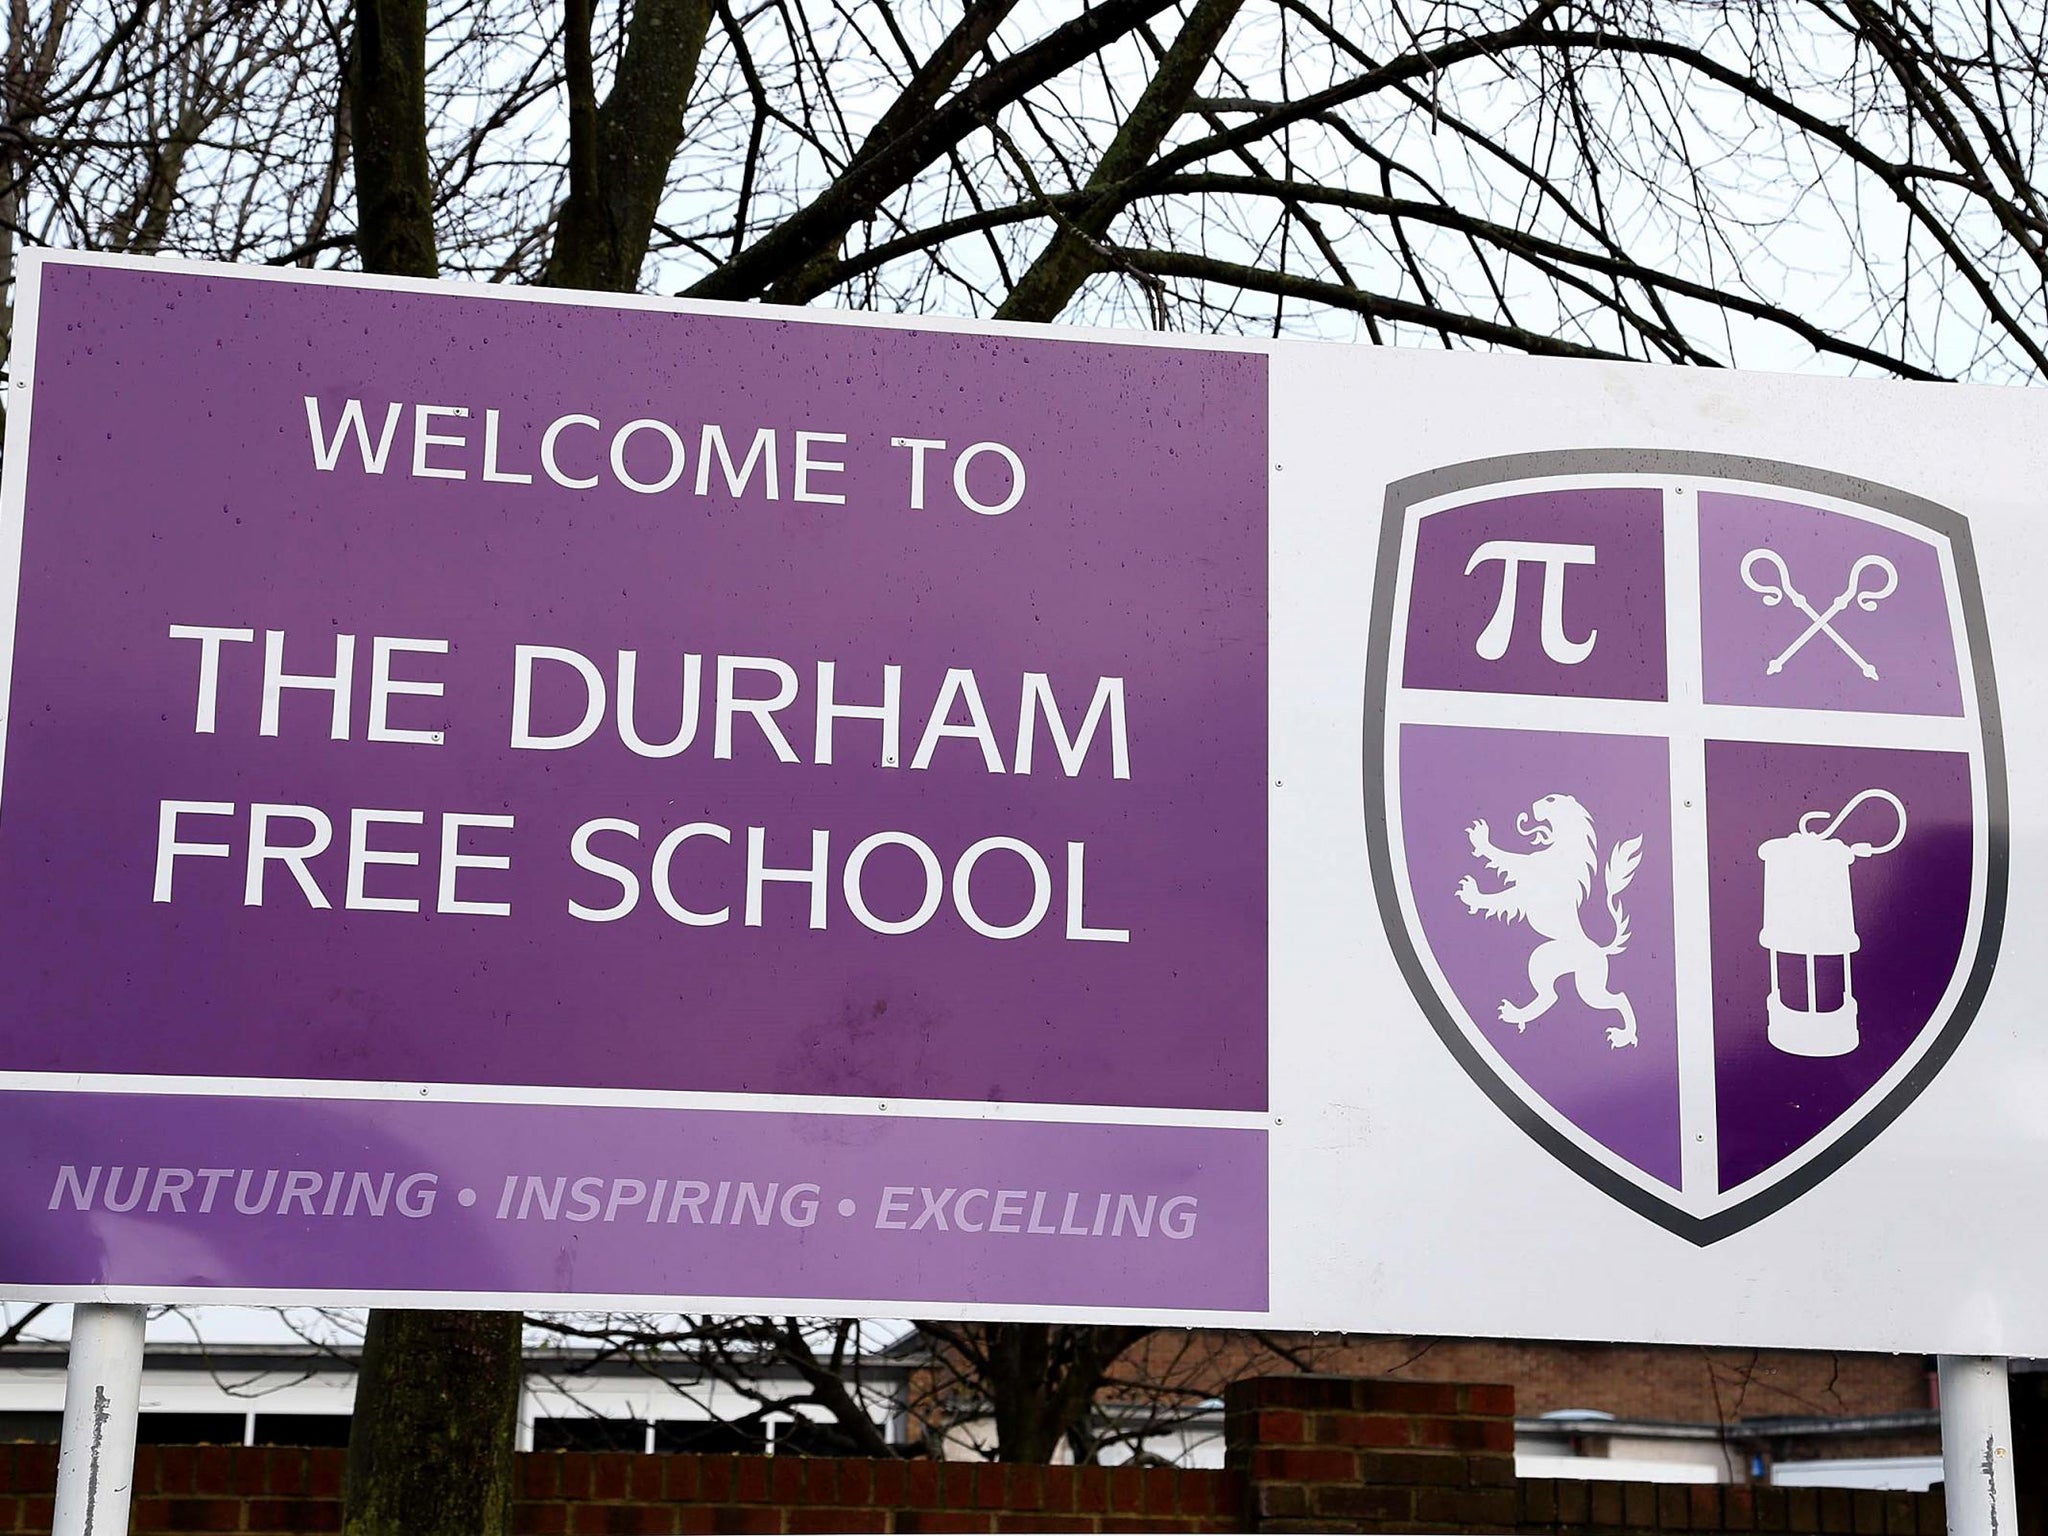 Durham Free School, which has already been ordered to close, has been accused of harbouring "prejudiced views"